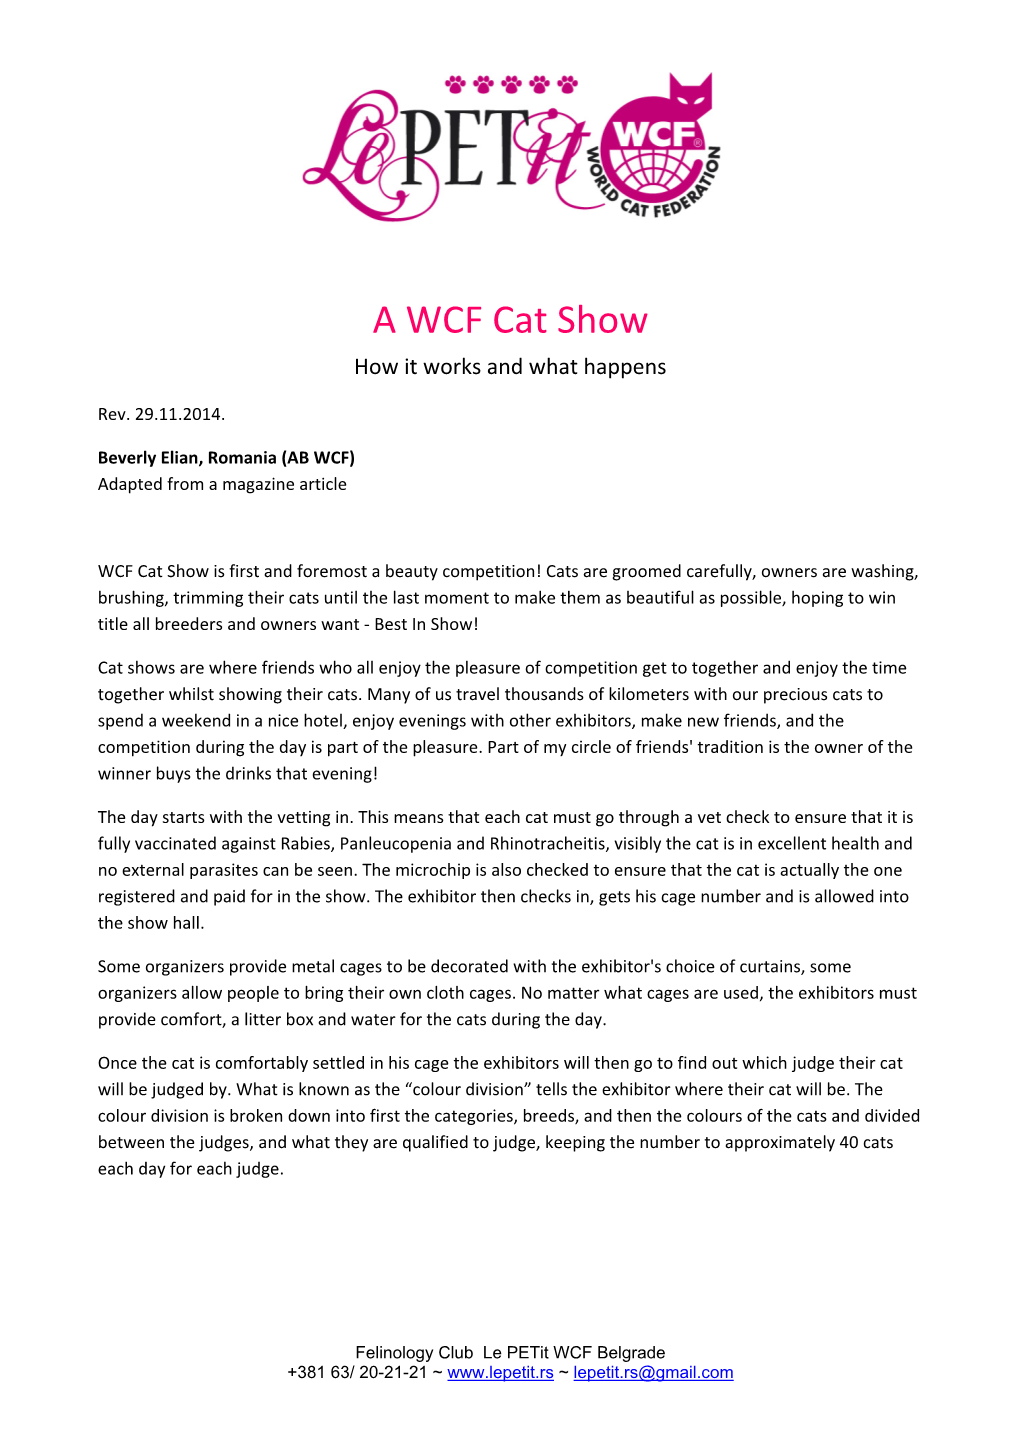 A WCF Cat Show How It Works and What Happens DocsLib